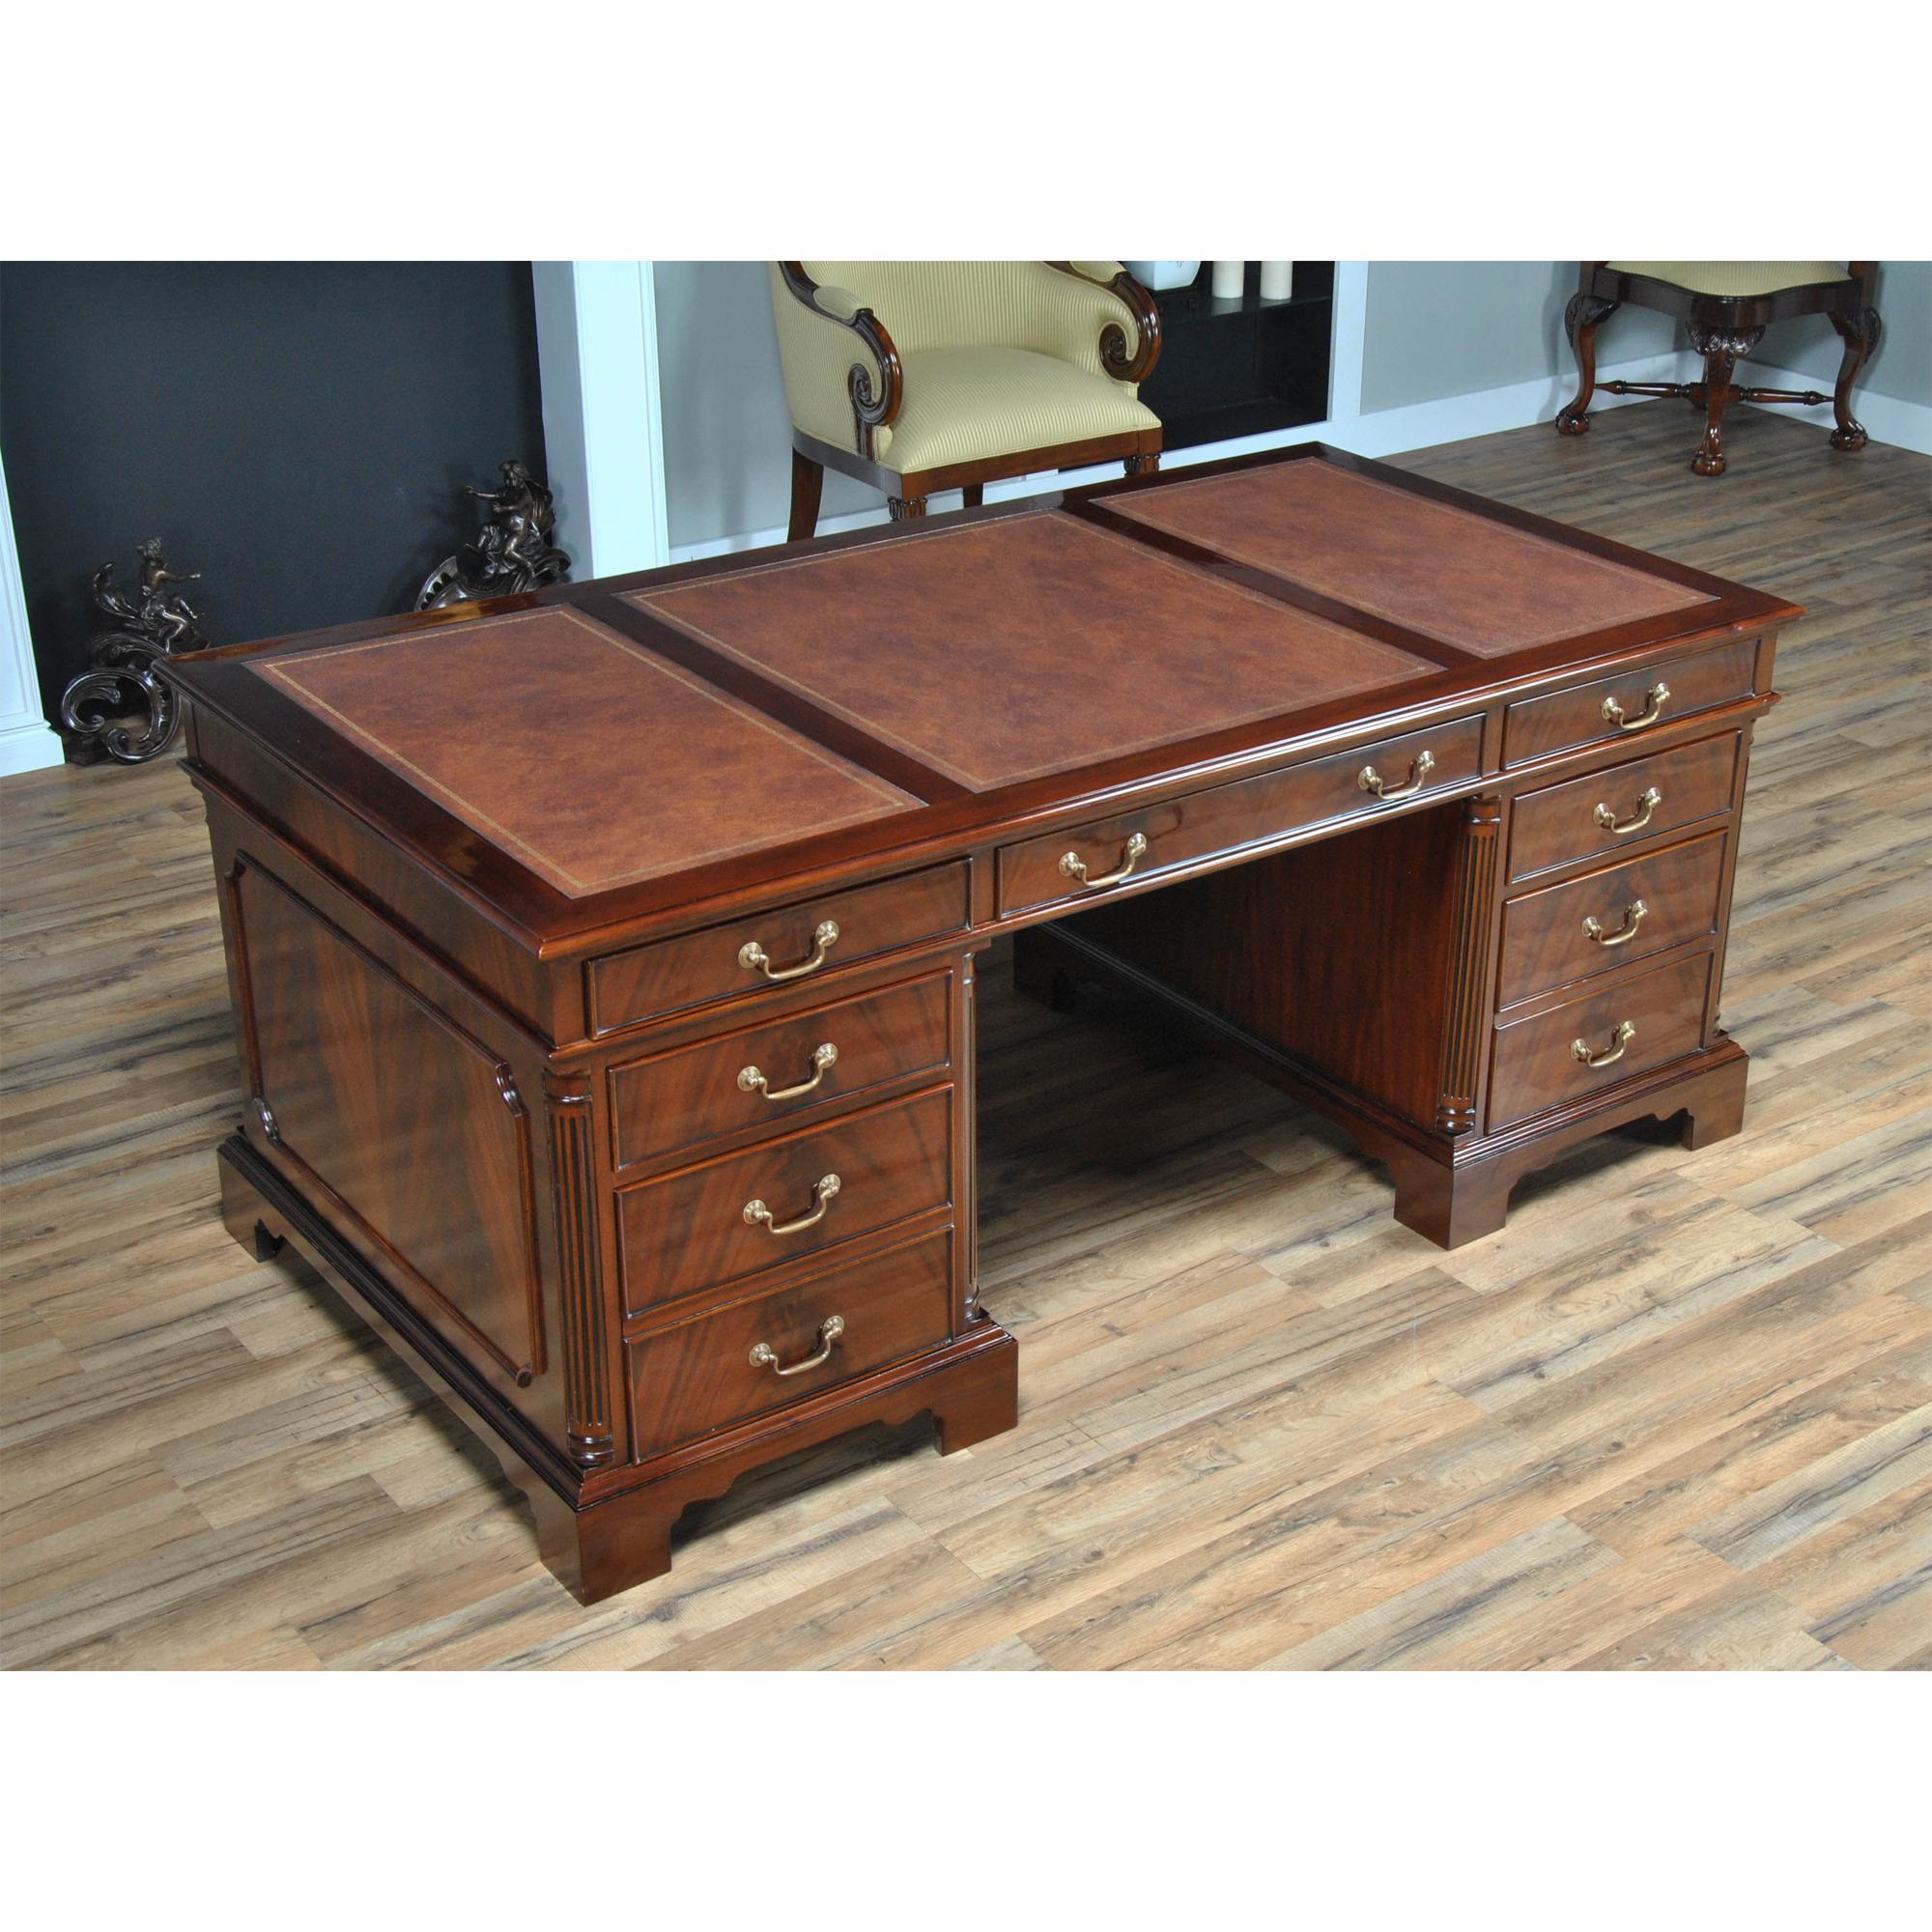 Equally suited for use either at the workplace or in a home office the Niagara Furniture Large Mahogany Executive Desk with tooled leather top is both decorative and functional. Built in three sections for easy handling and installation the top